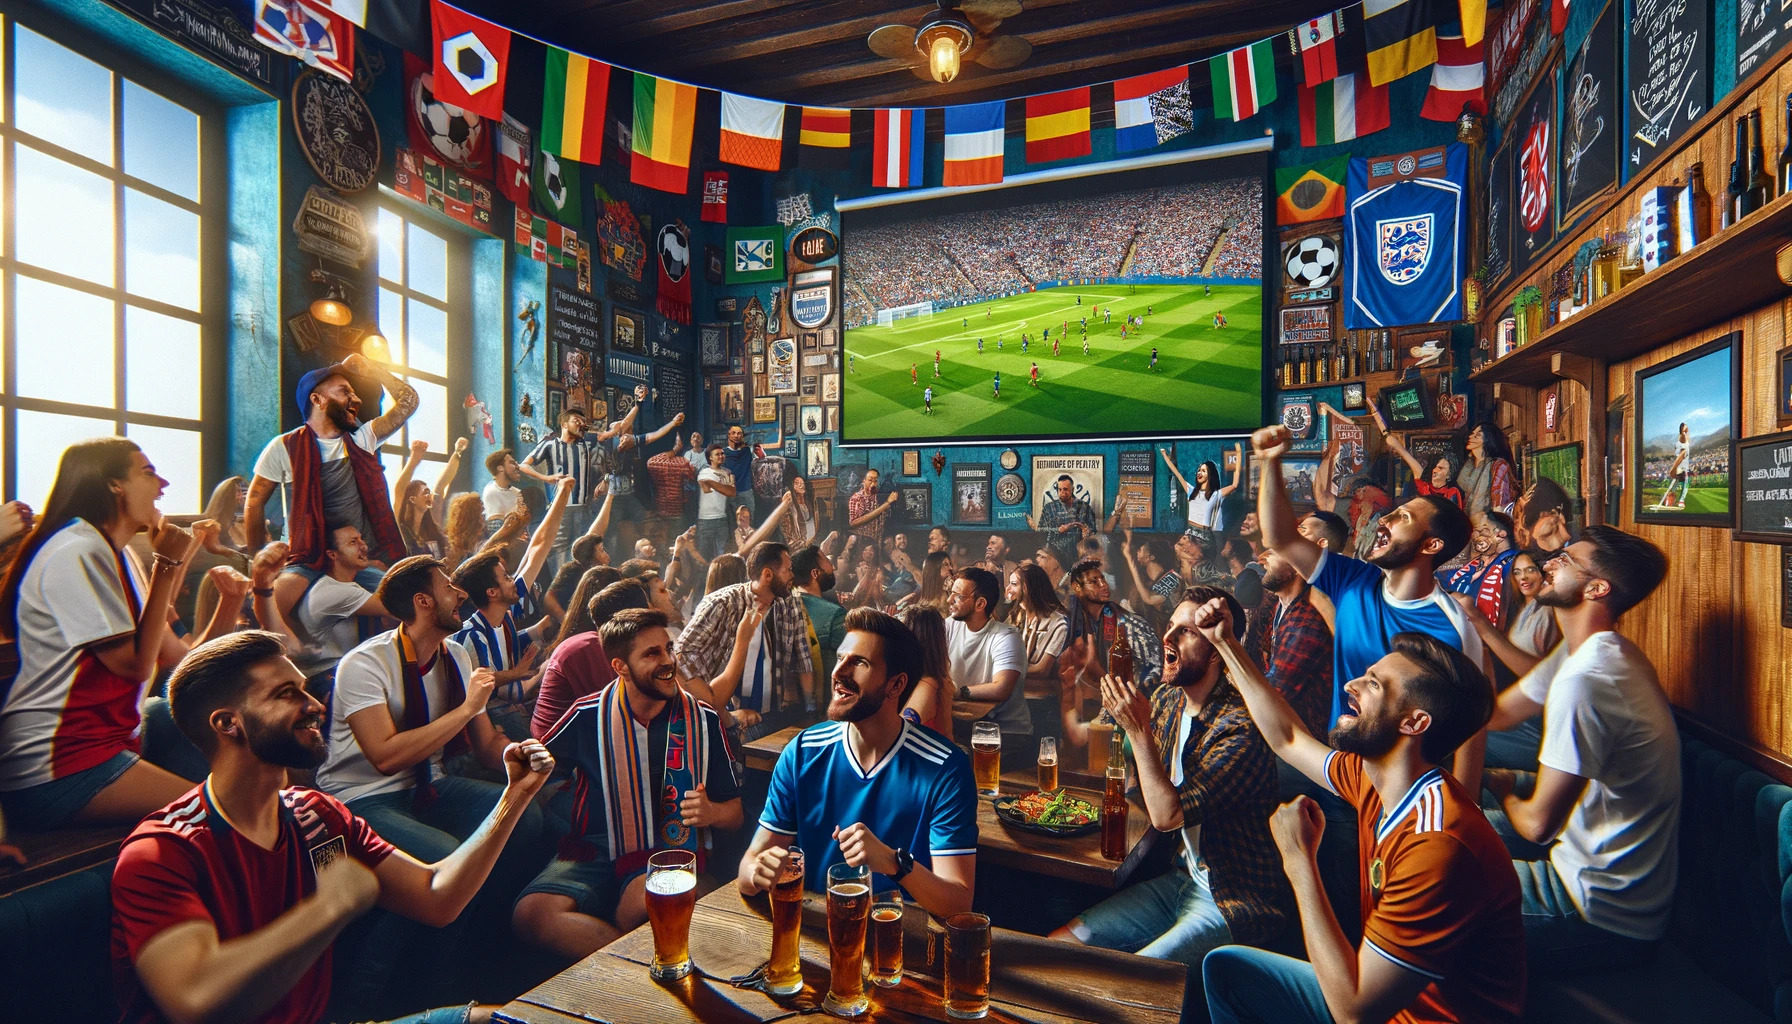 A vibrant and diverse scene of soccer fans gathered in a cozy pub, watching a live match on a large screen mounted on the wall. The crowd is a lively